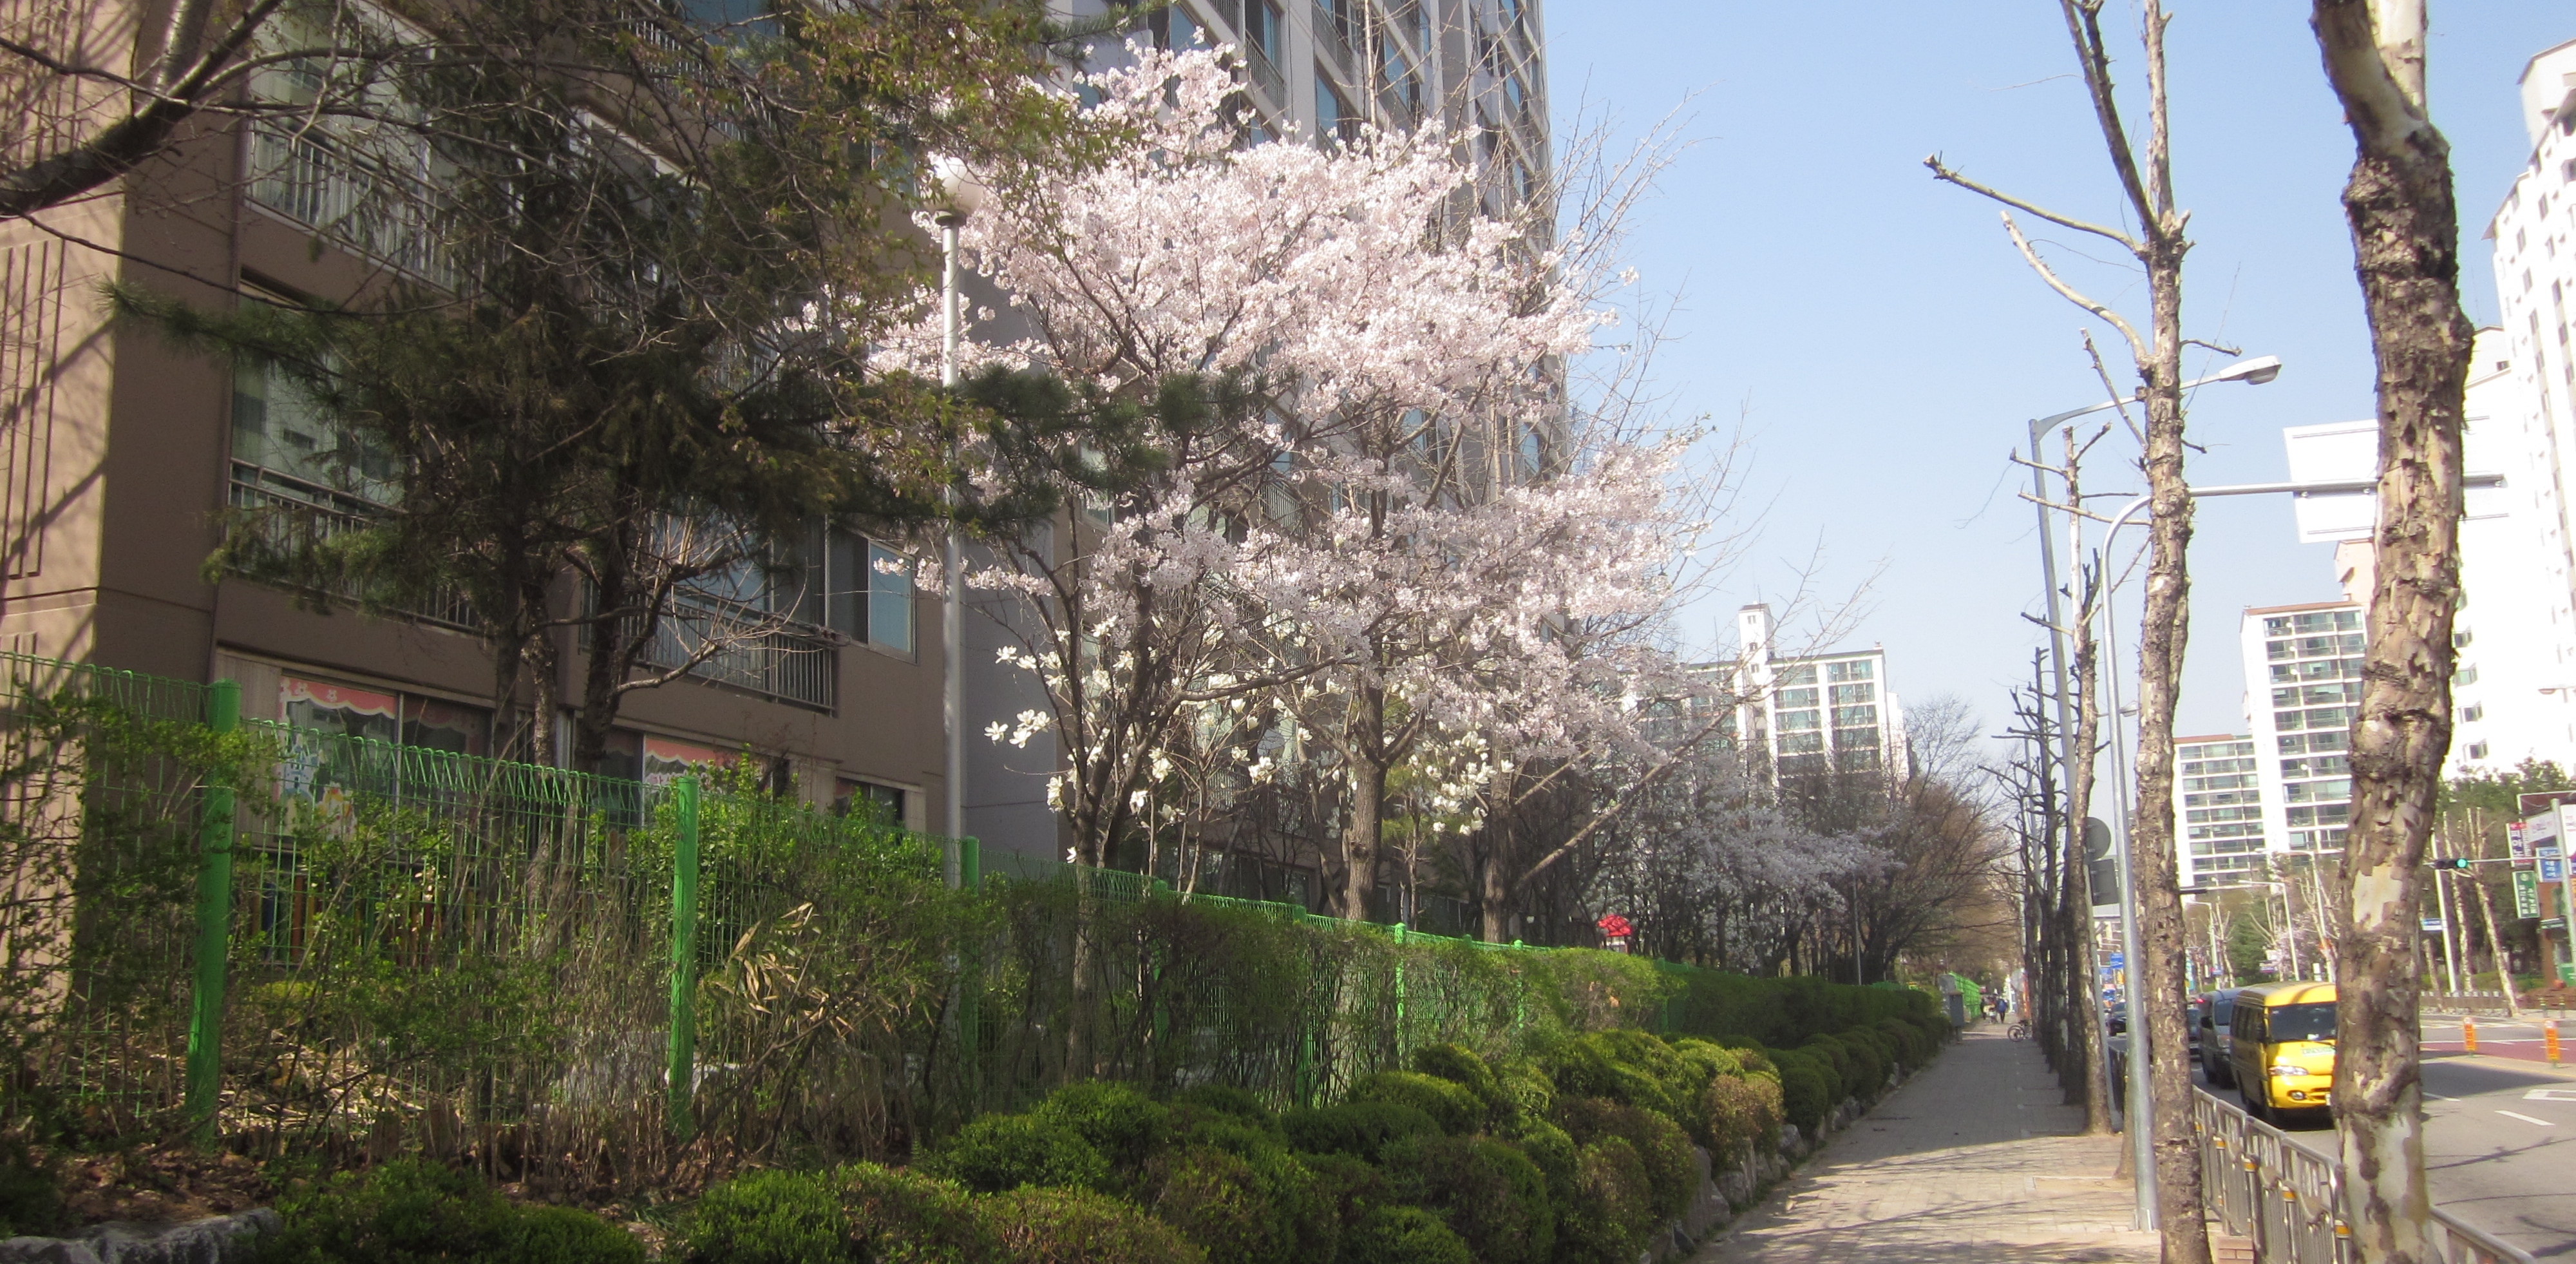 A picture along an avenue with some trees in front of a high-rise apartment building to the left, one of which is in full, pink-colored bloom